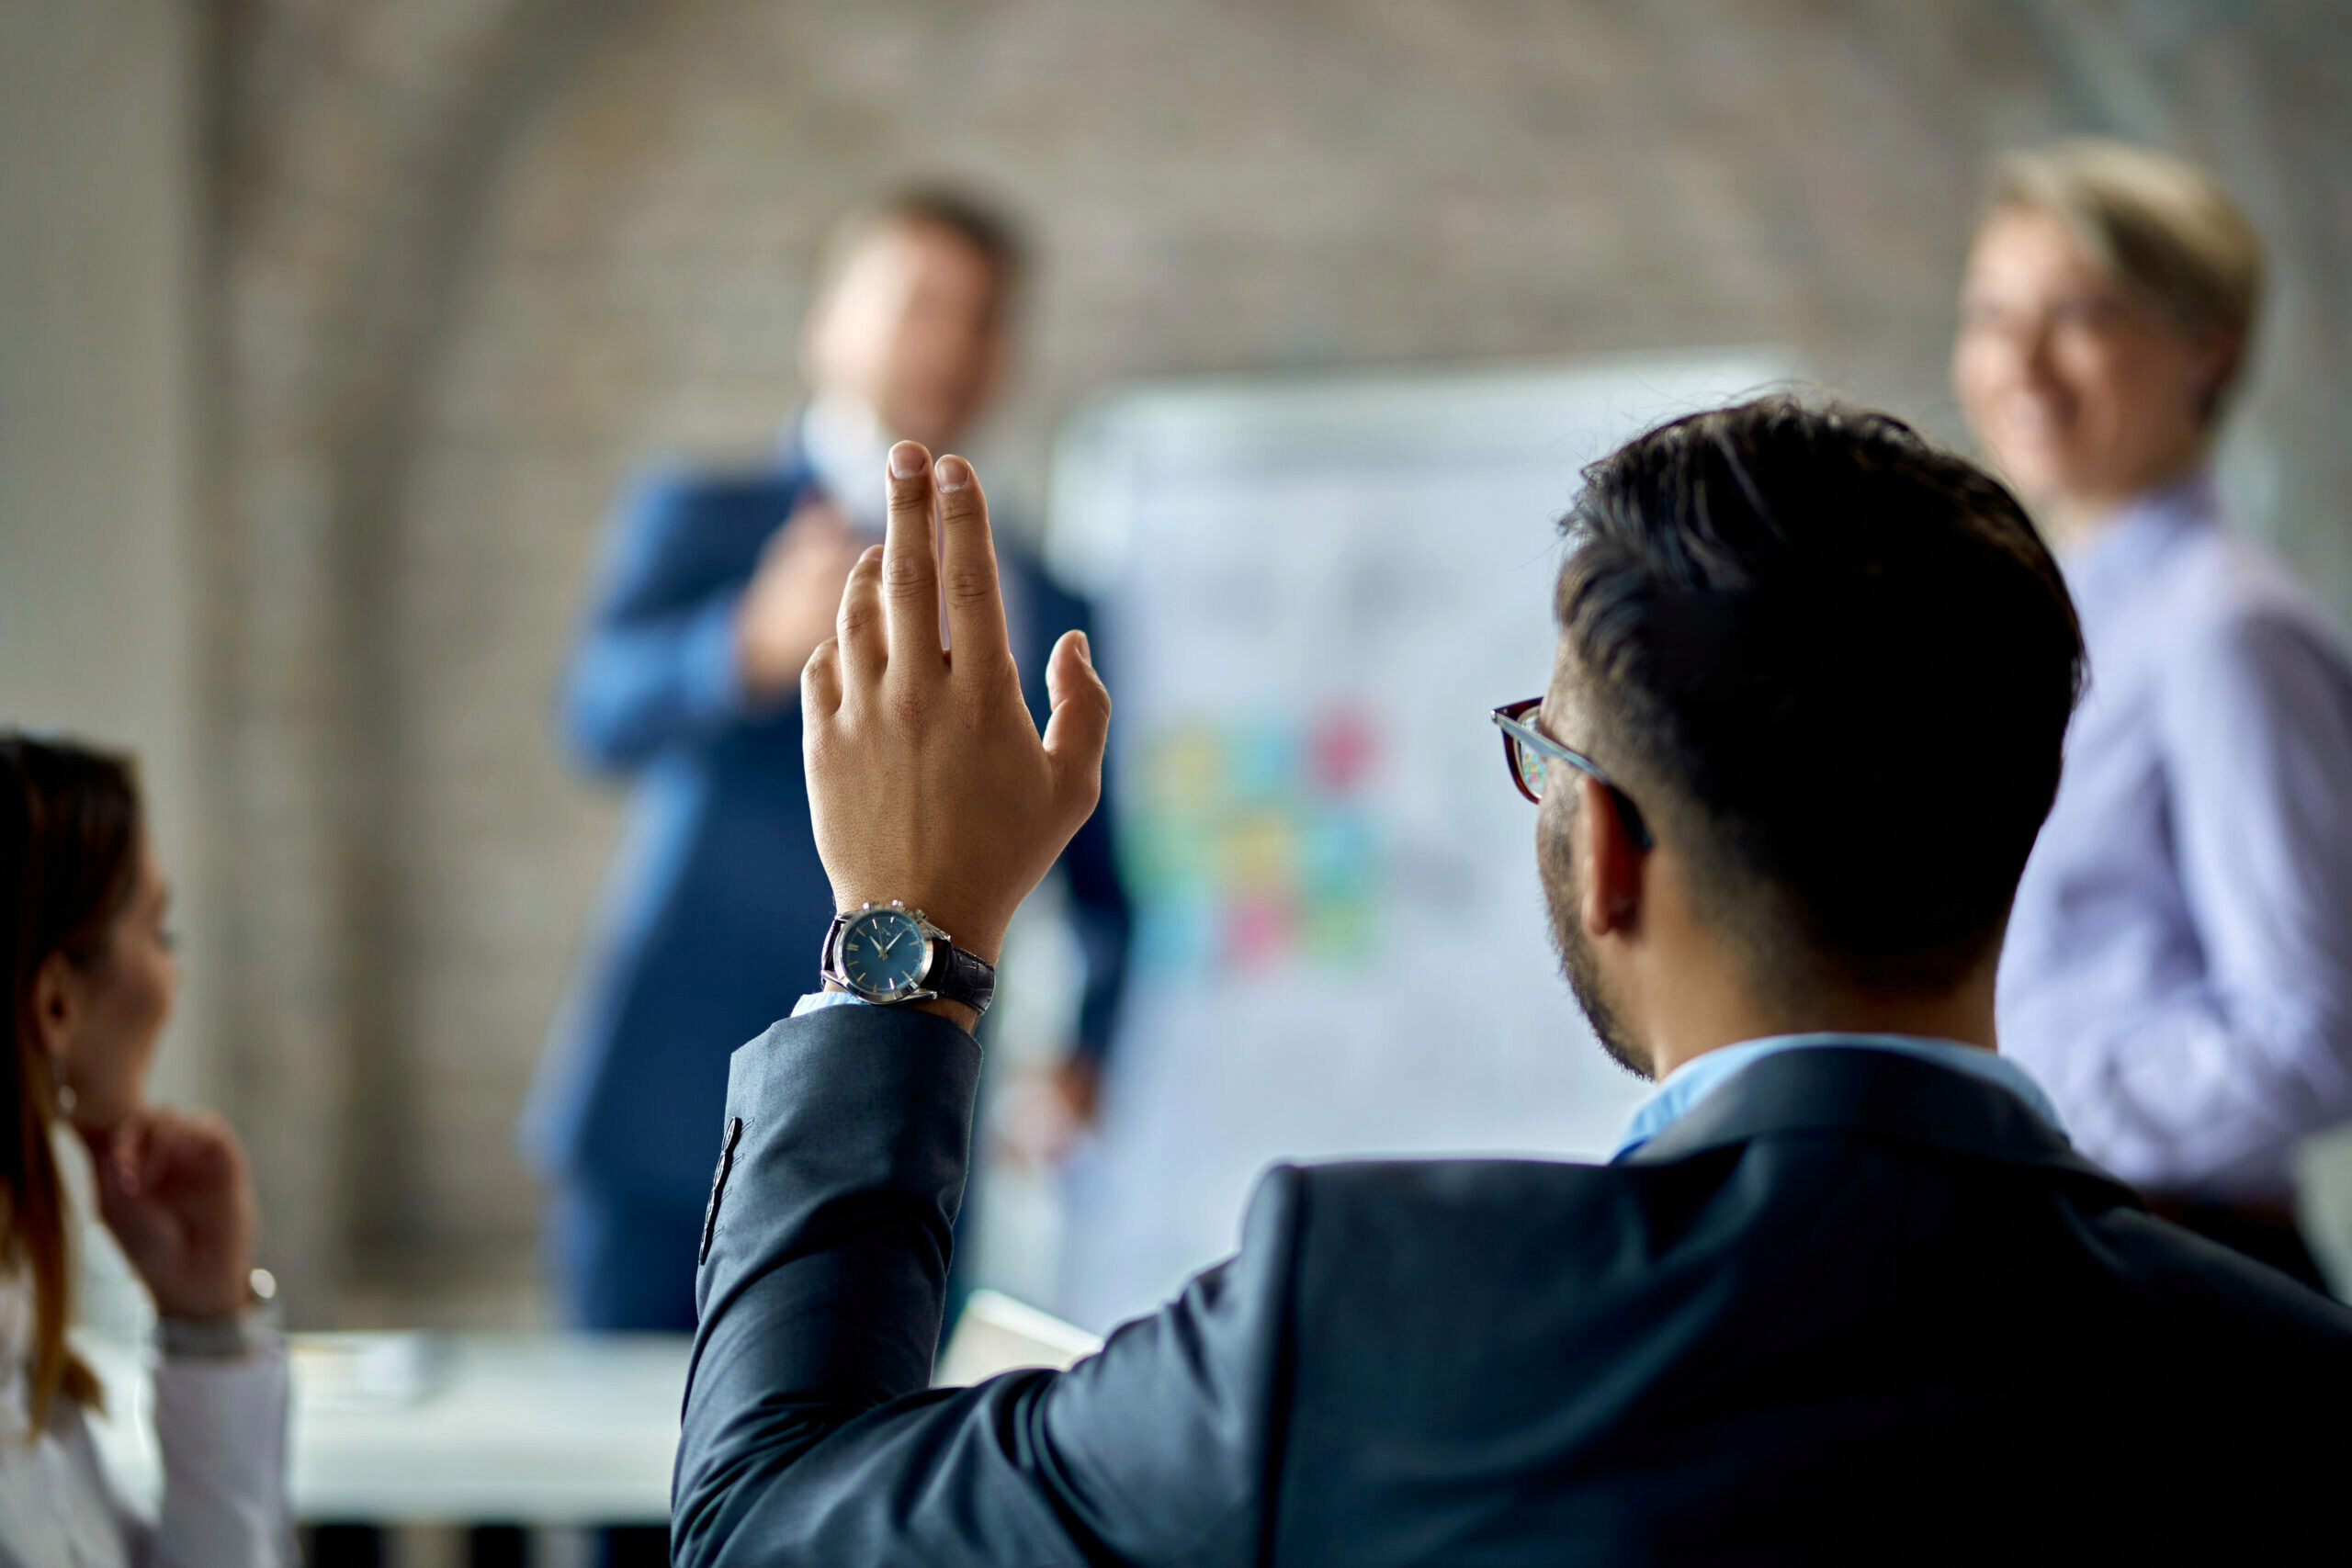 Person in suit raising their hand to ask a question during presentation